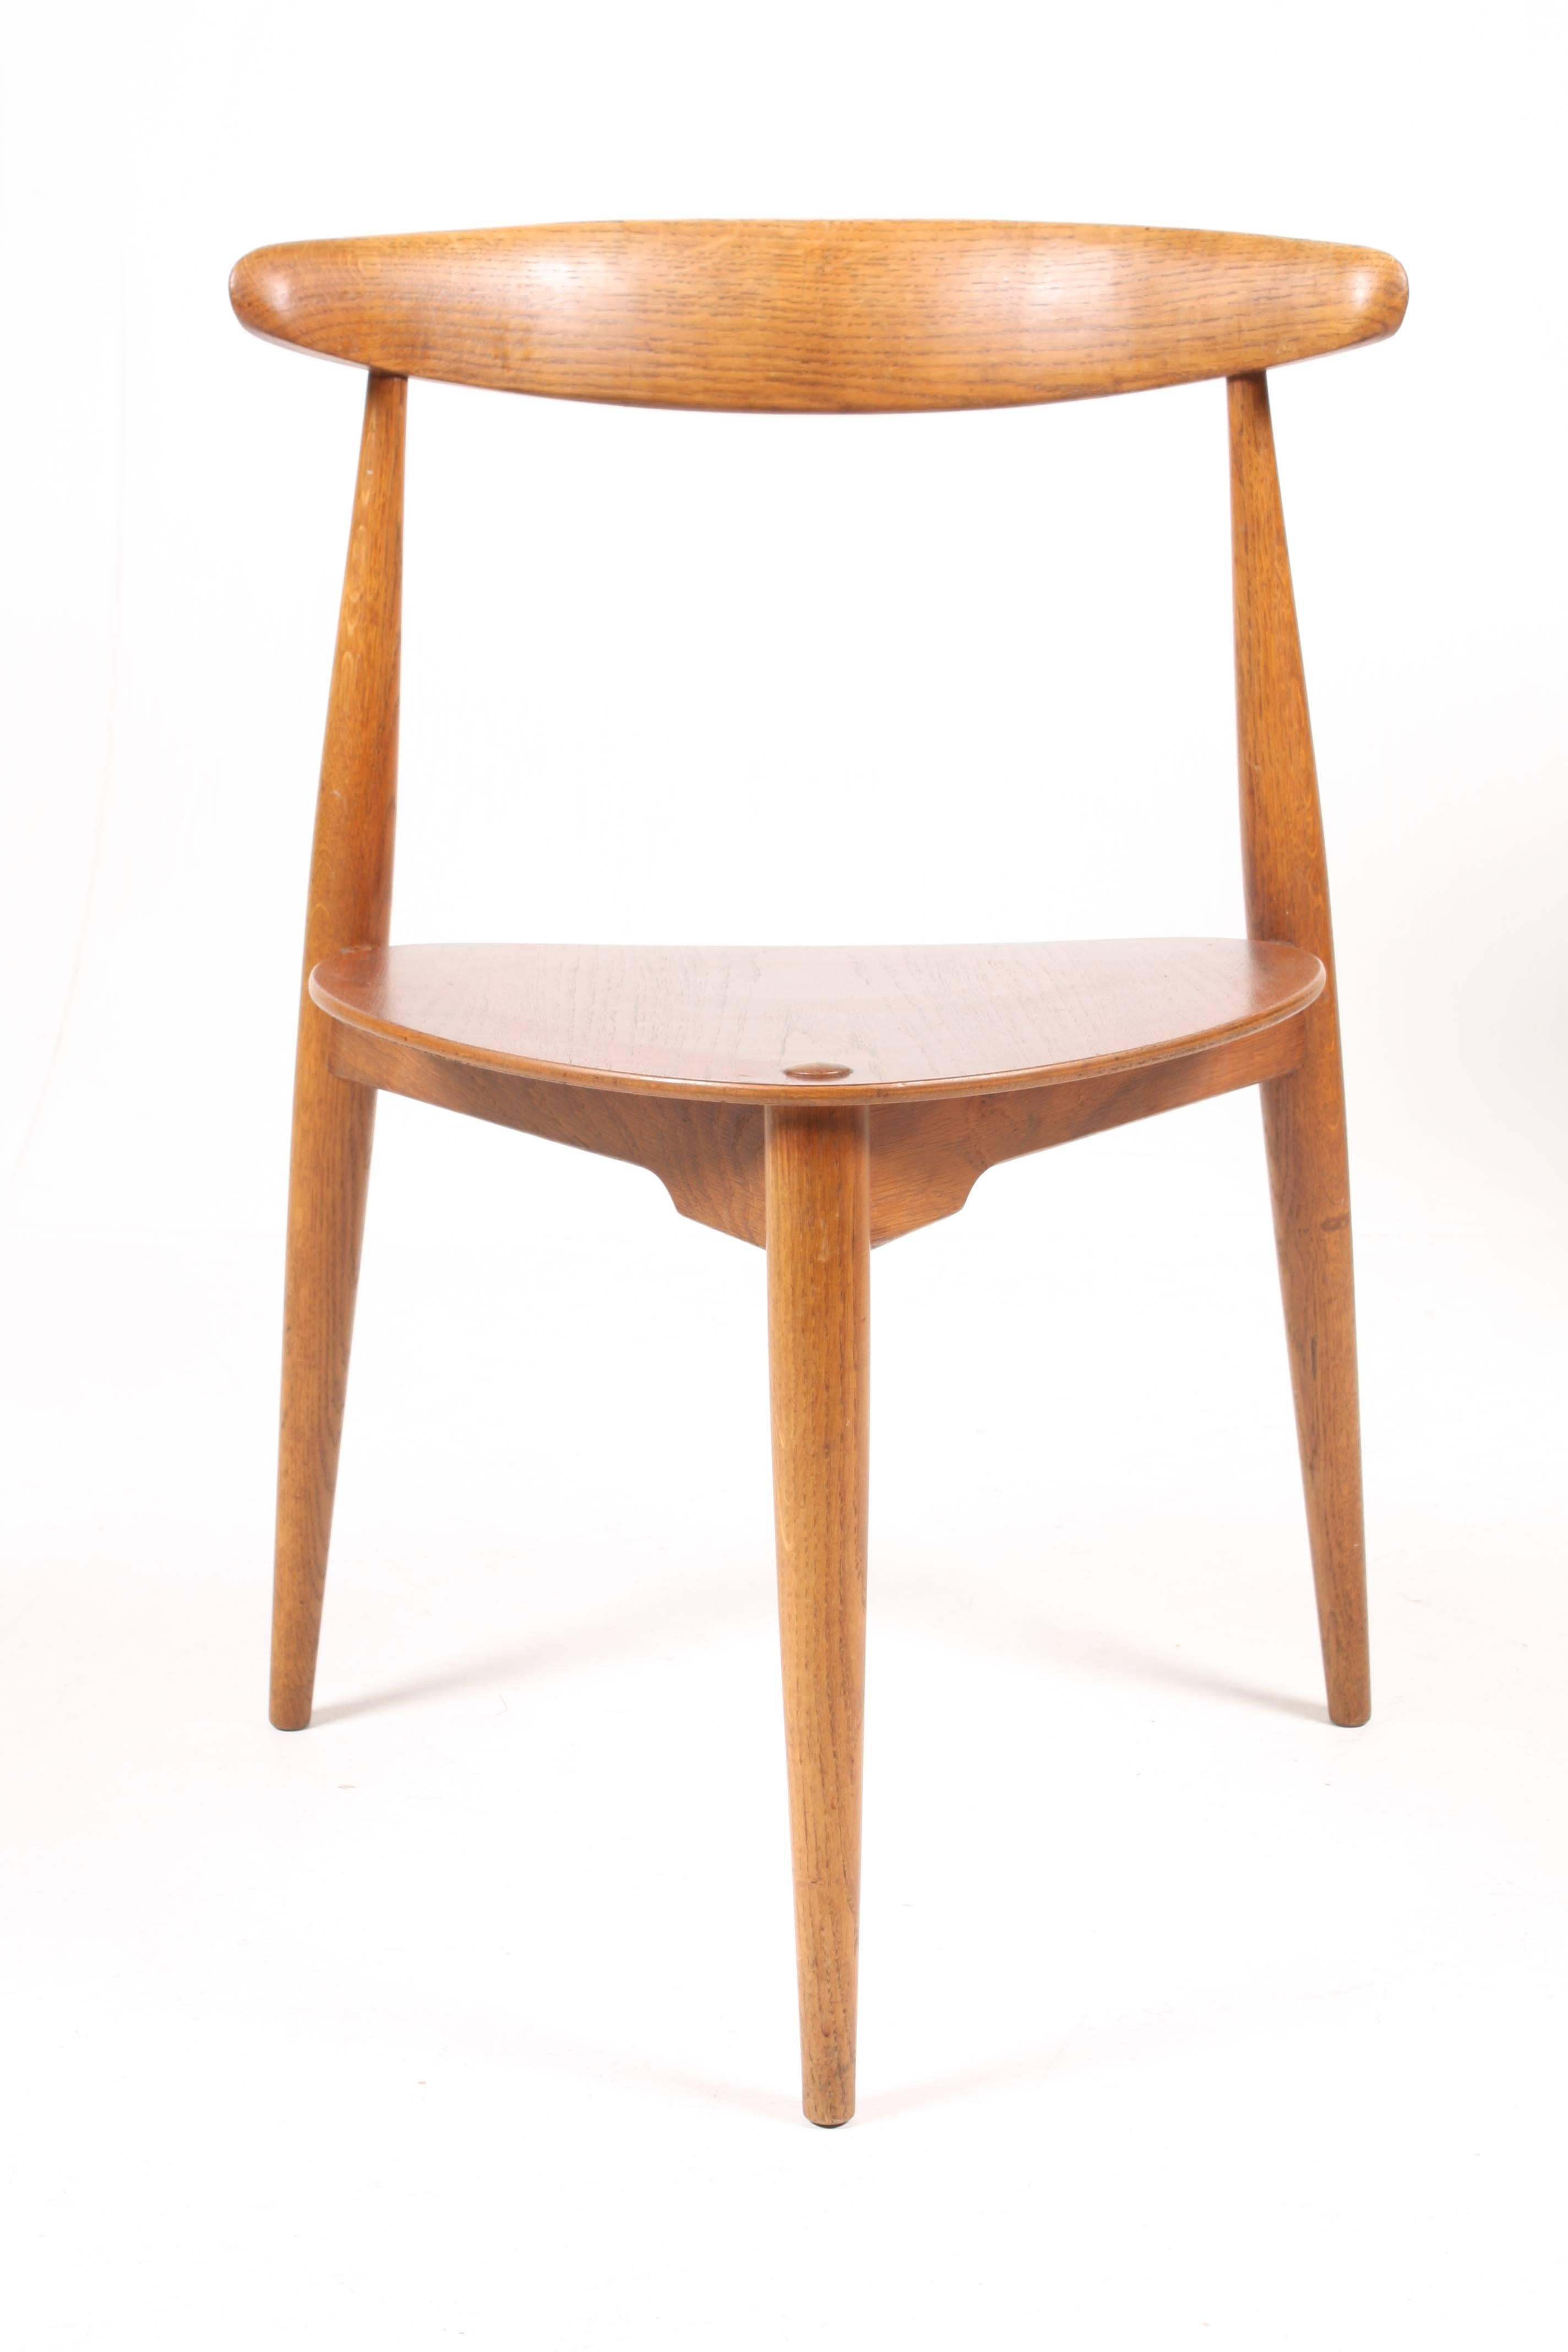 Set of six, 4103 chairs in teak and solid oak designed by Maa. Hans Wegner for Fritz Hansen Cabinetmakers in 1952. The chair also goes under the name 